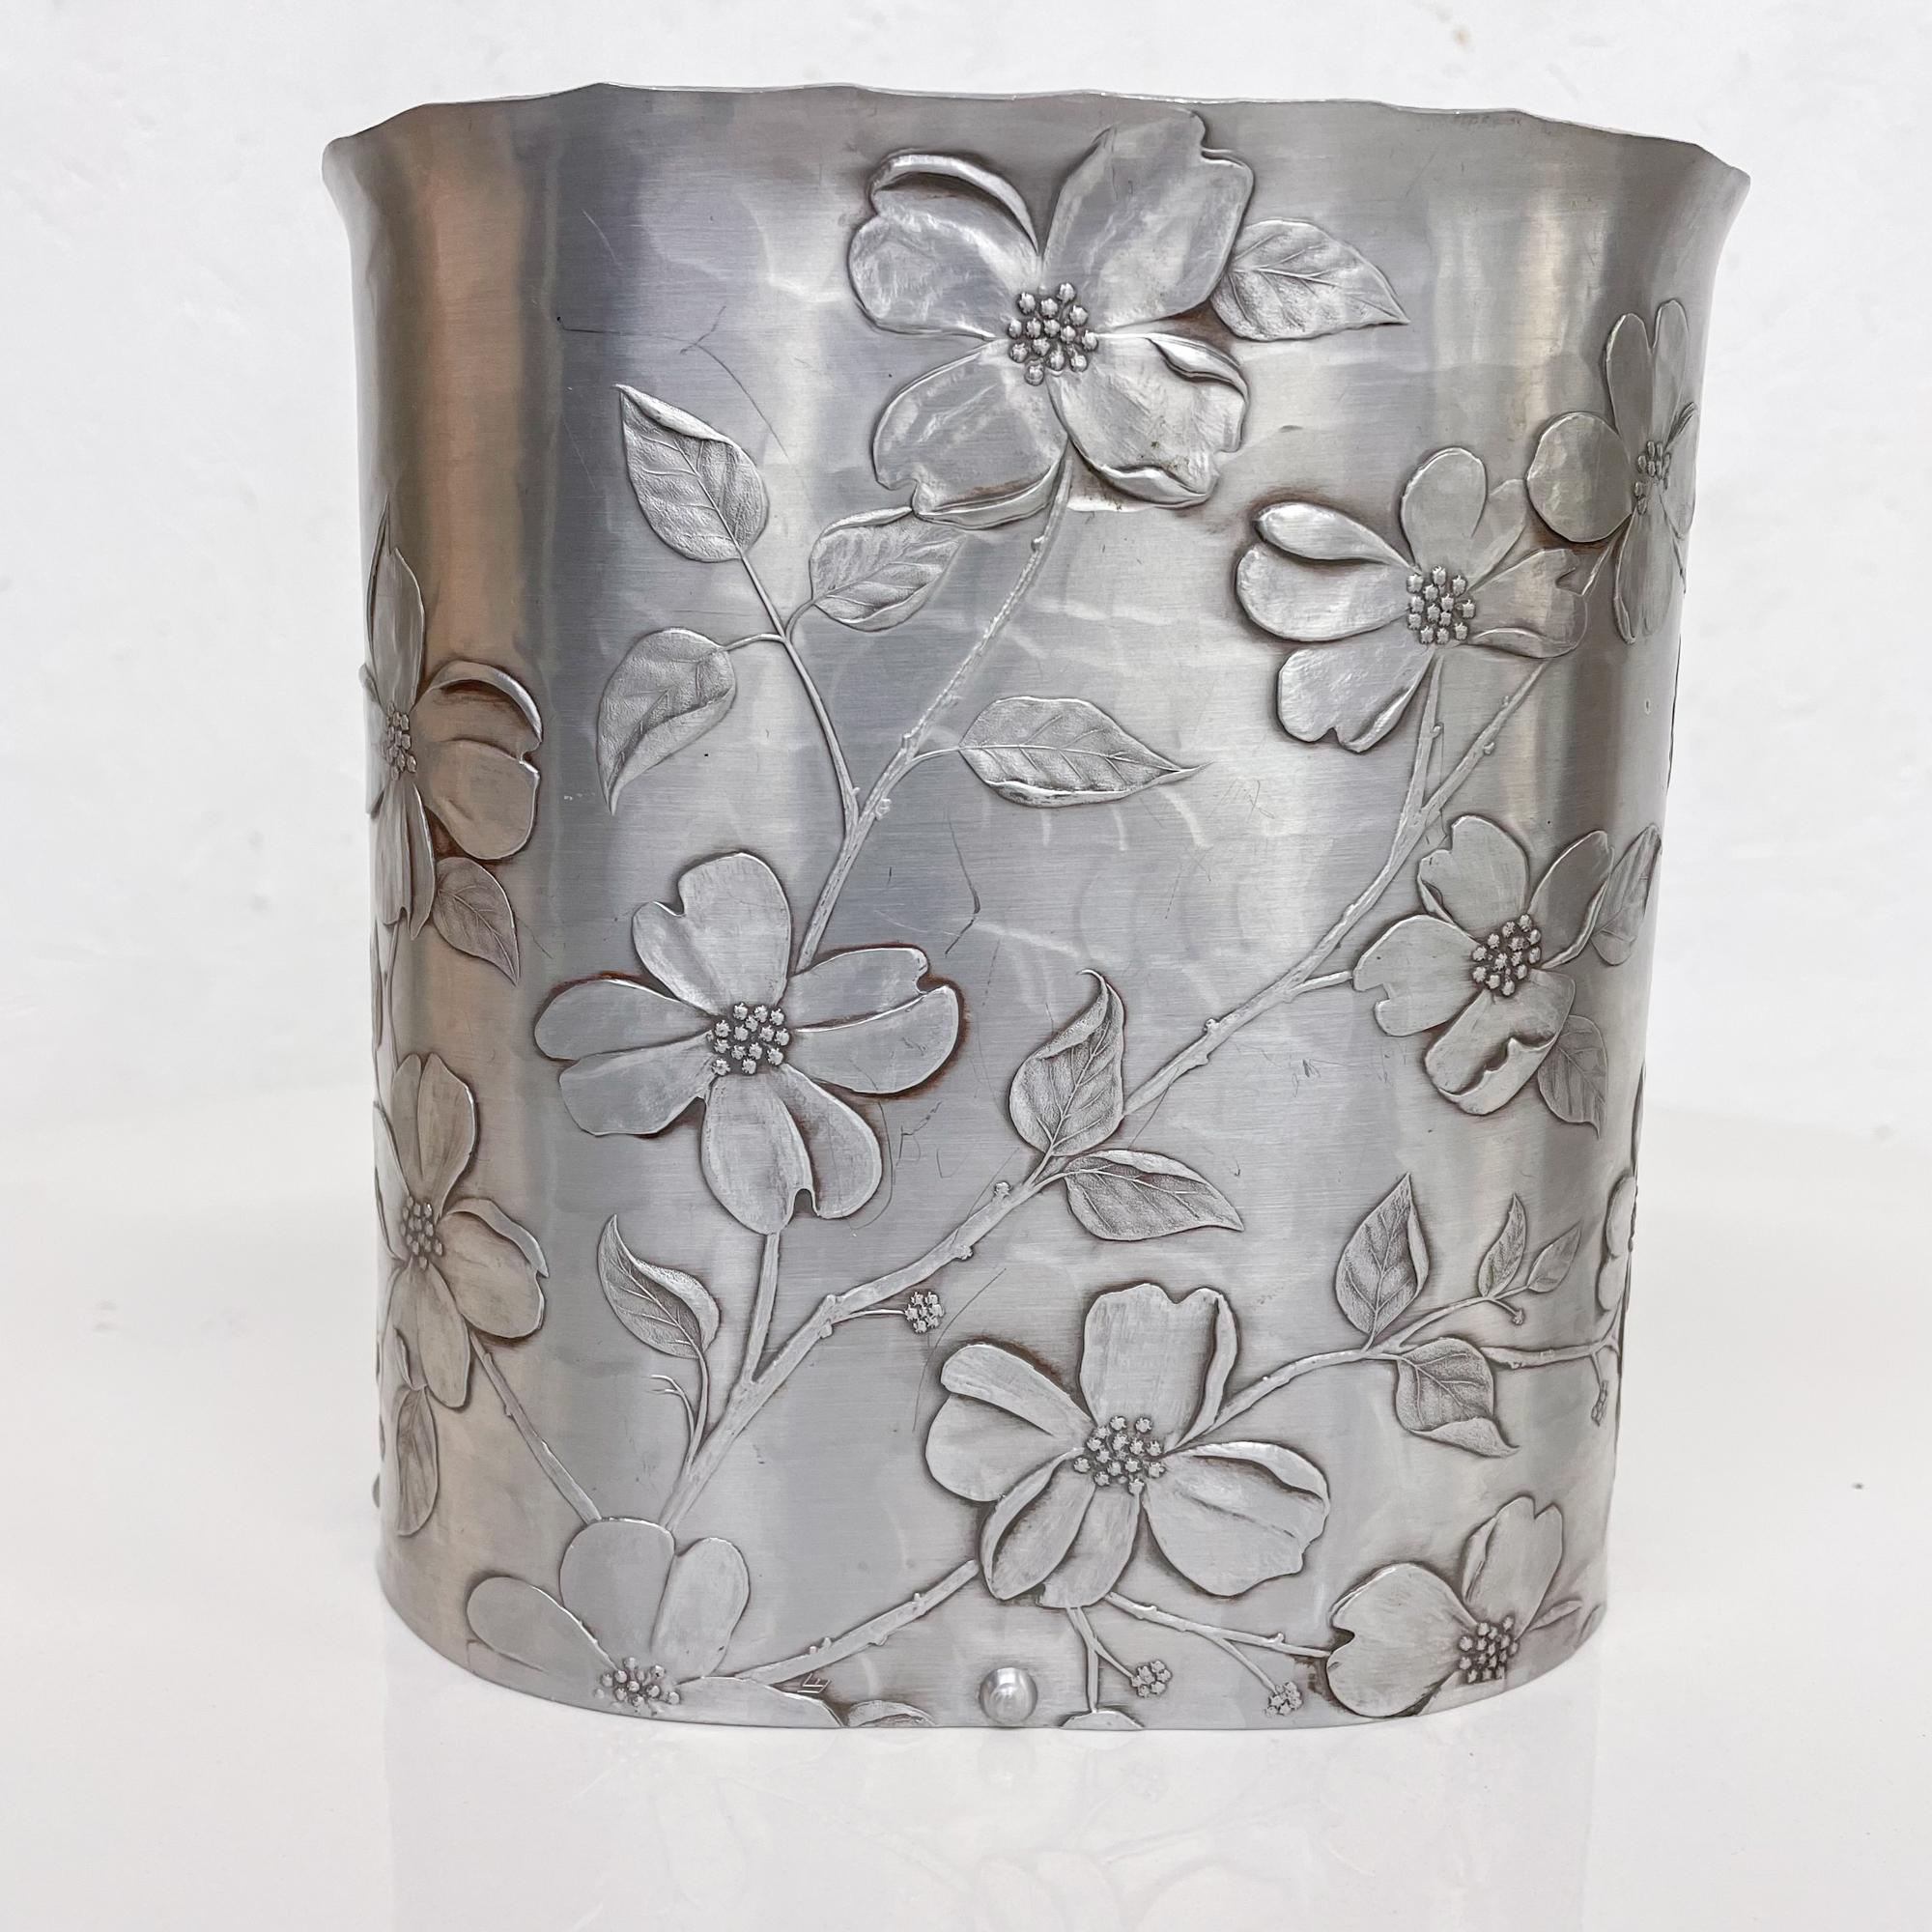 Waste Basket
Wendell August Forge Pretty Petite handmade wastebasket trashcan dogwood motif in hammered riveted art iron aluminum 1960s.
Designed by Wendell August.
Short version in oval shape. 
Measures: 6.88h x 6.75w x 4.5 inches
Maker